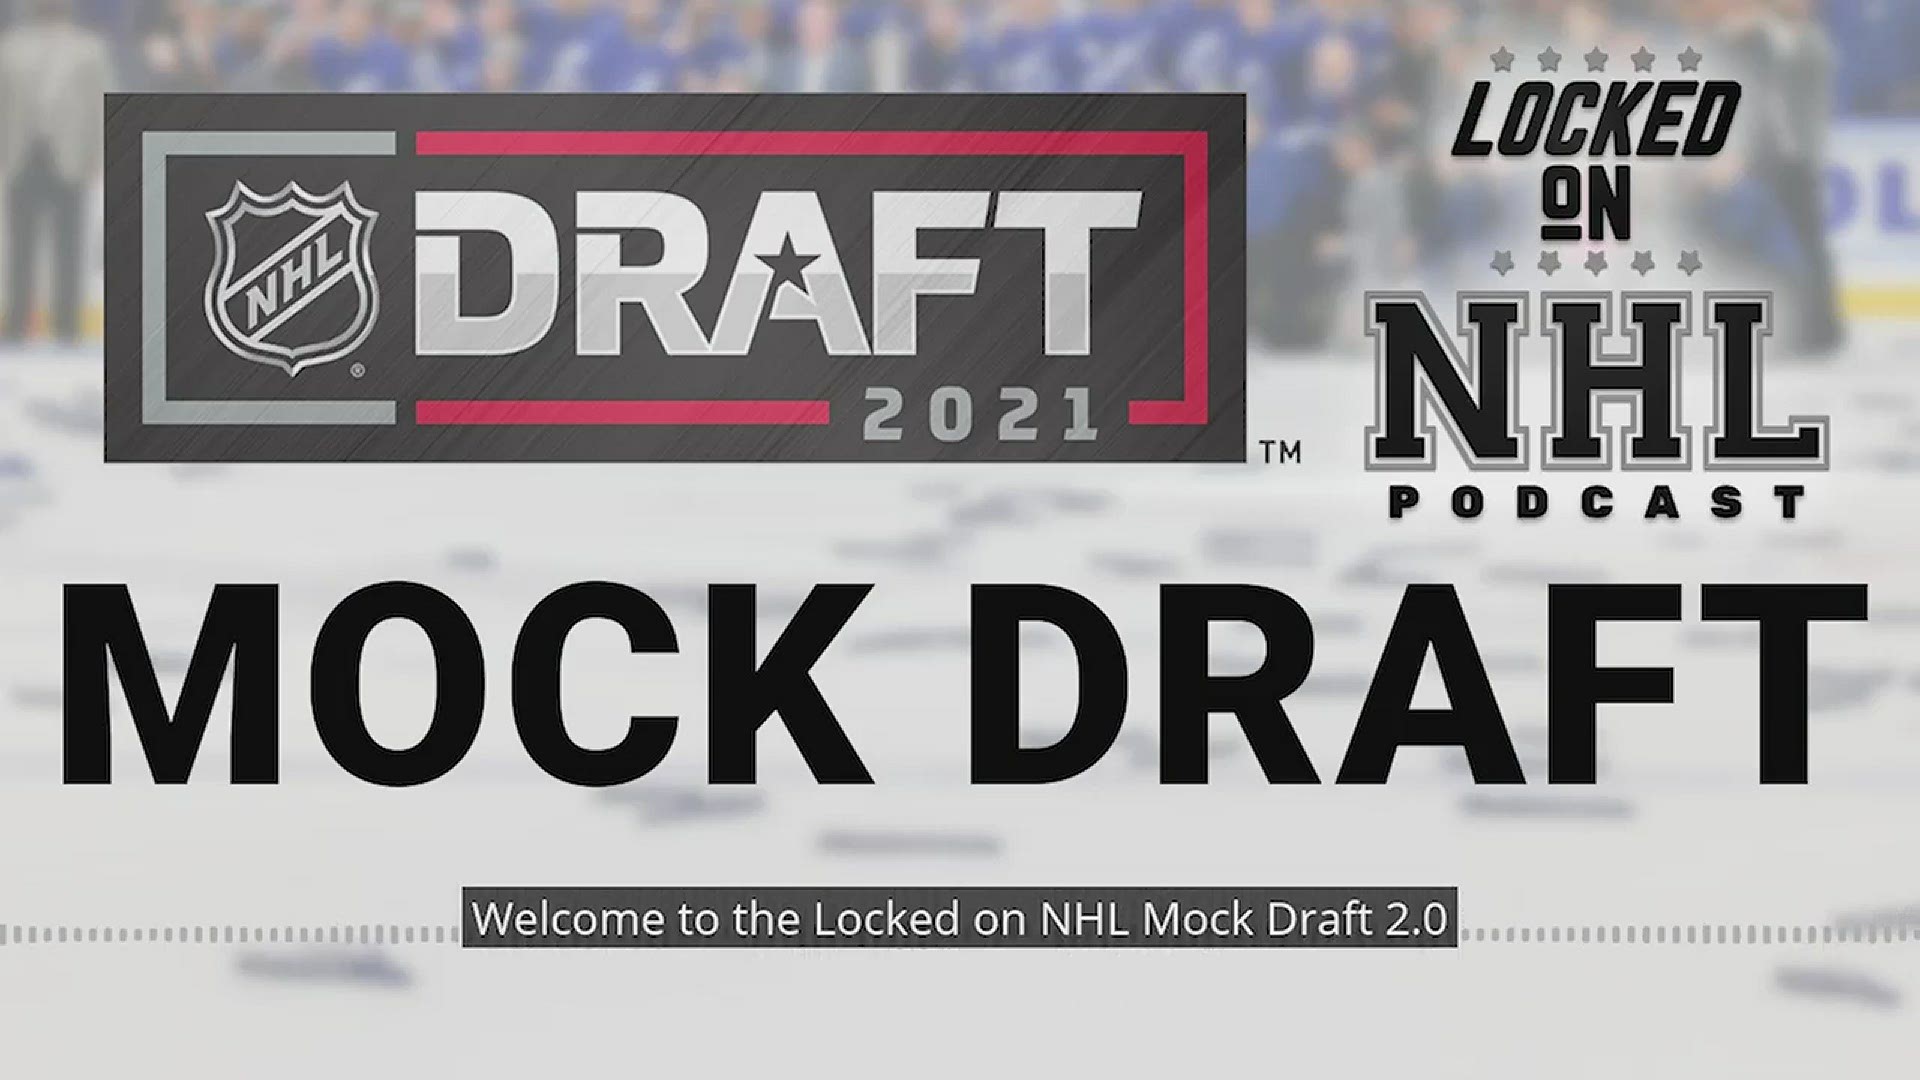 The NHL Draft is almost here. Get ready by checking out our complete first round NHL Mock Draft with selections made by Locked On team podcast hosts.